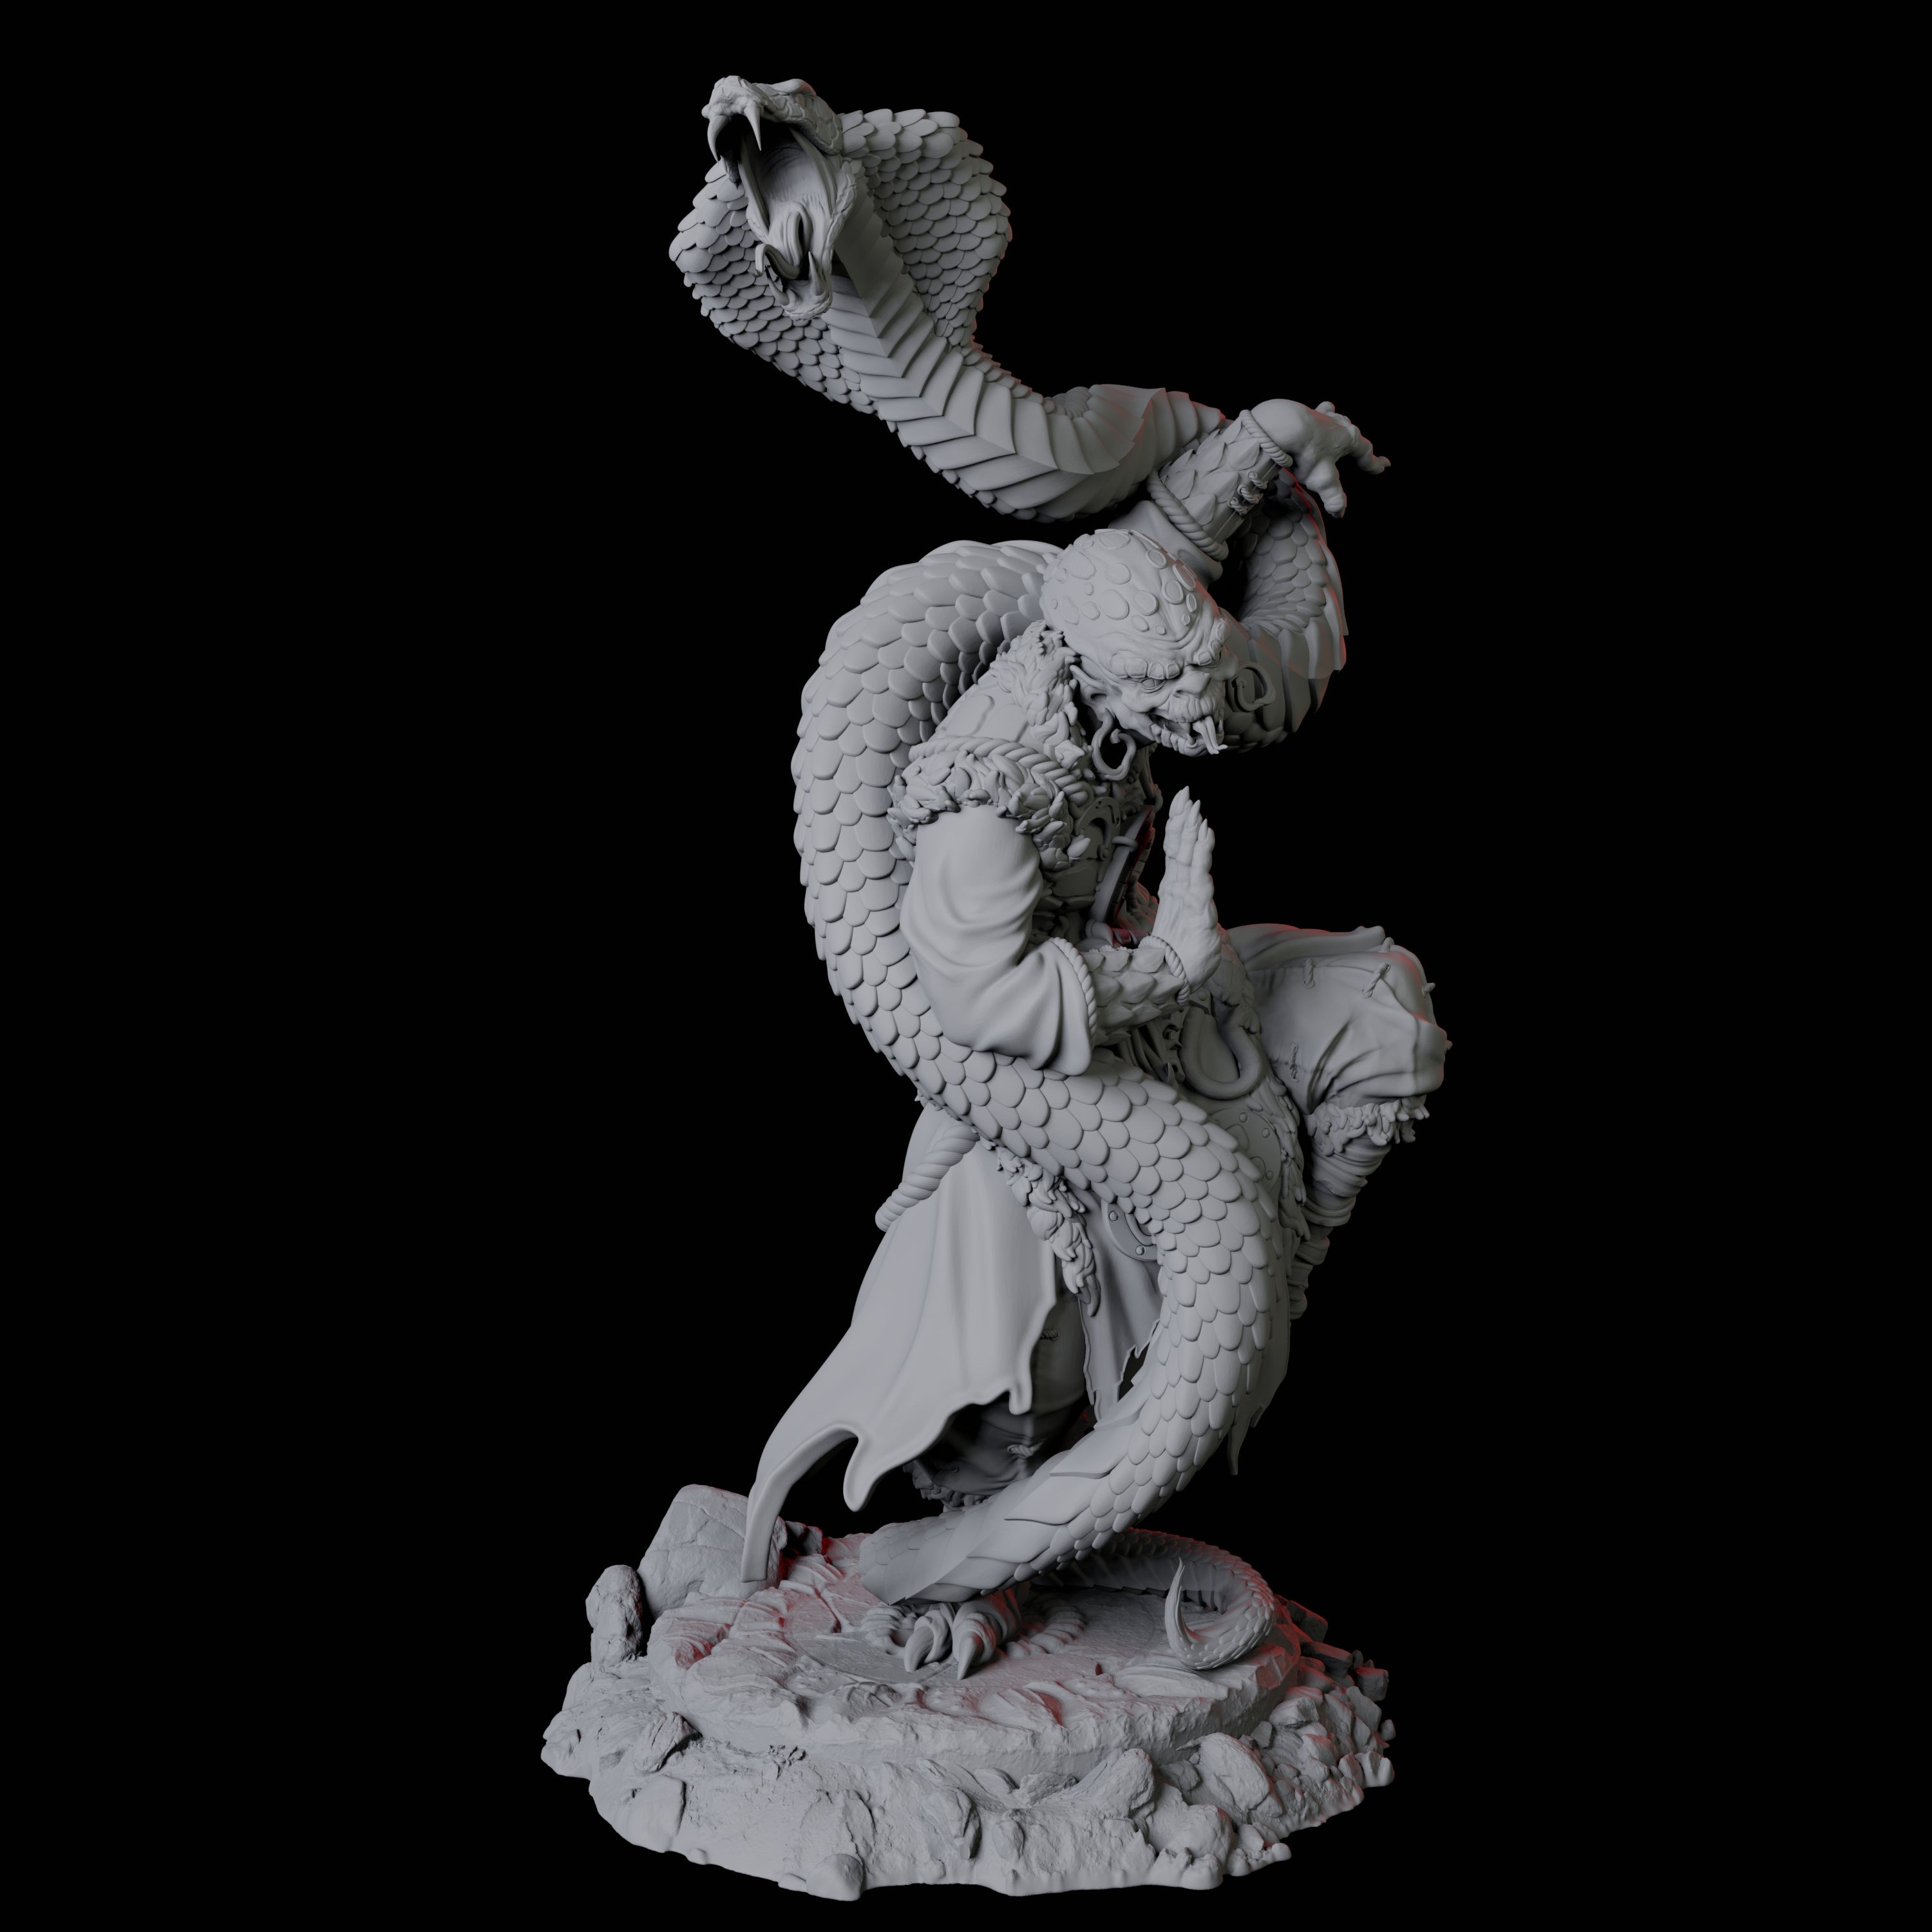 Yuan-Ti Snake Charmer C Miniature for Dungeons and Dragons, Pathfinder or other TTRPGs